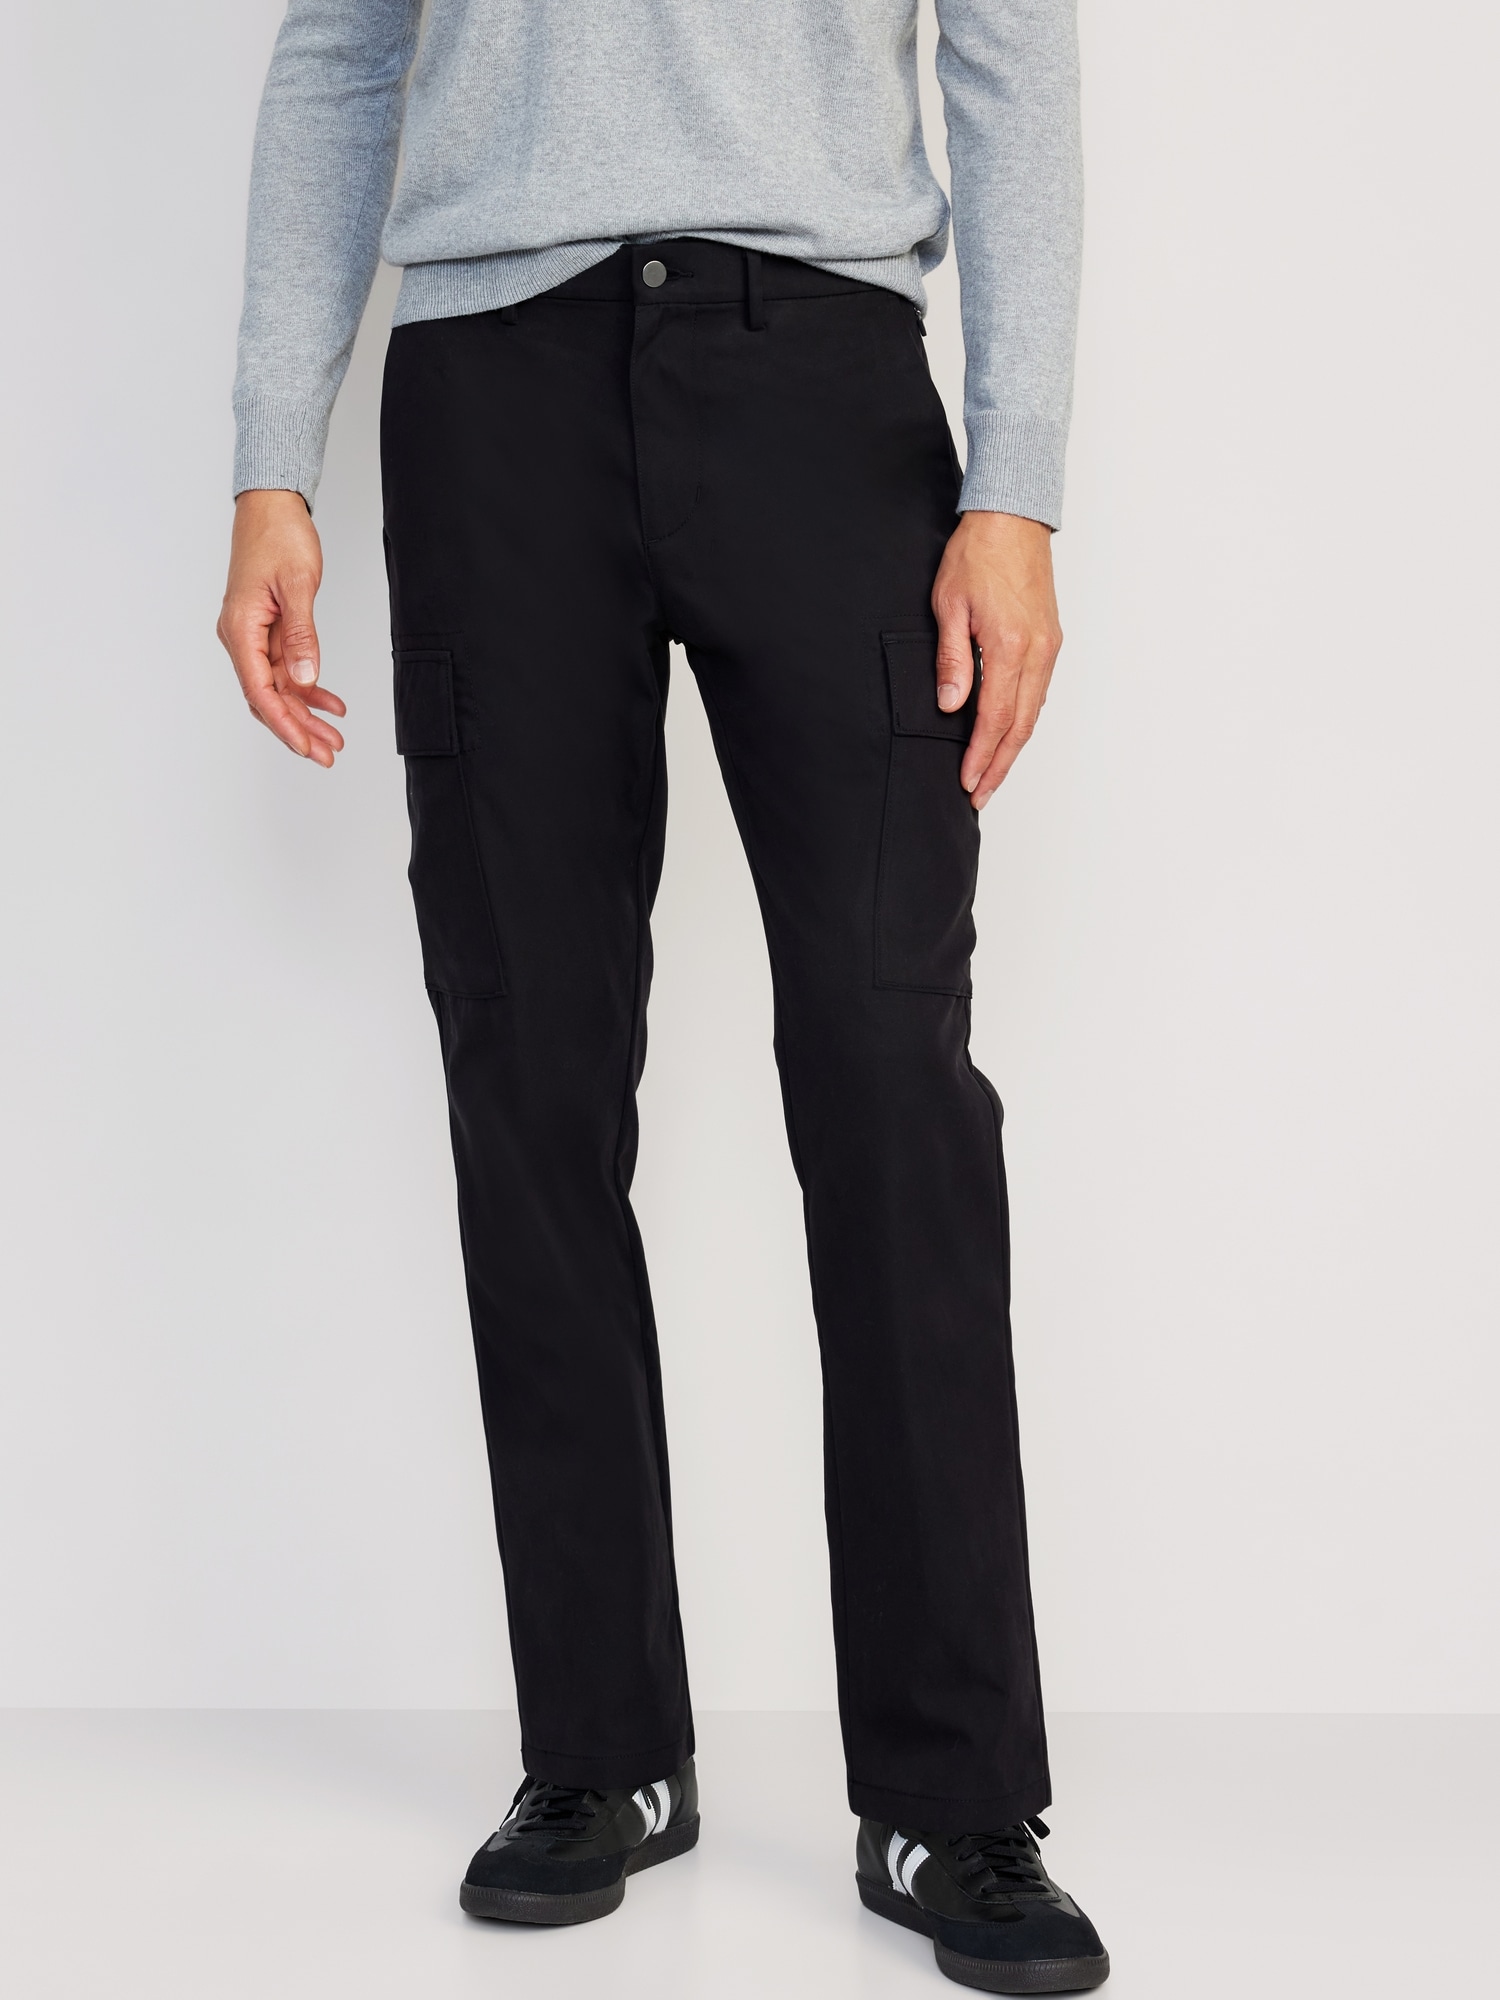 Straight Ultimate Tech Built-In Flex Cargo Pants | Old Navy